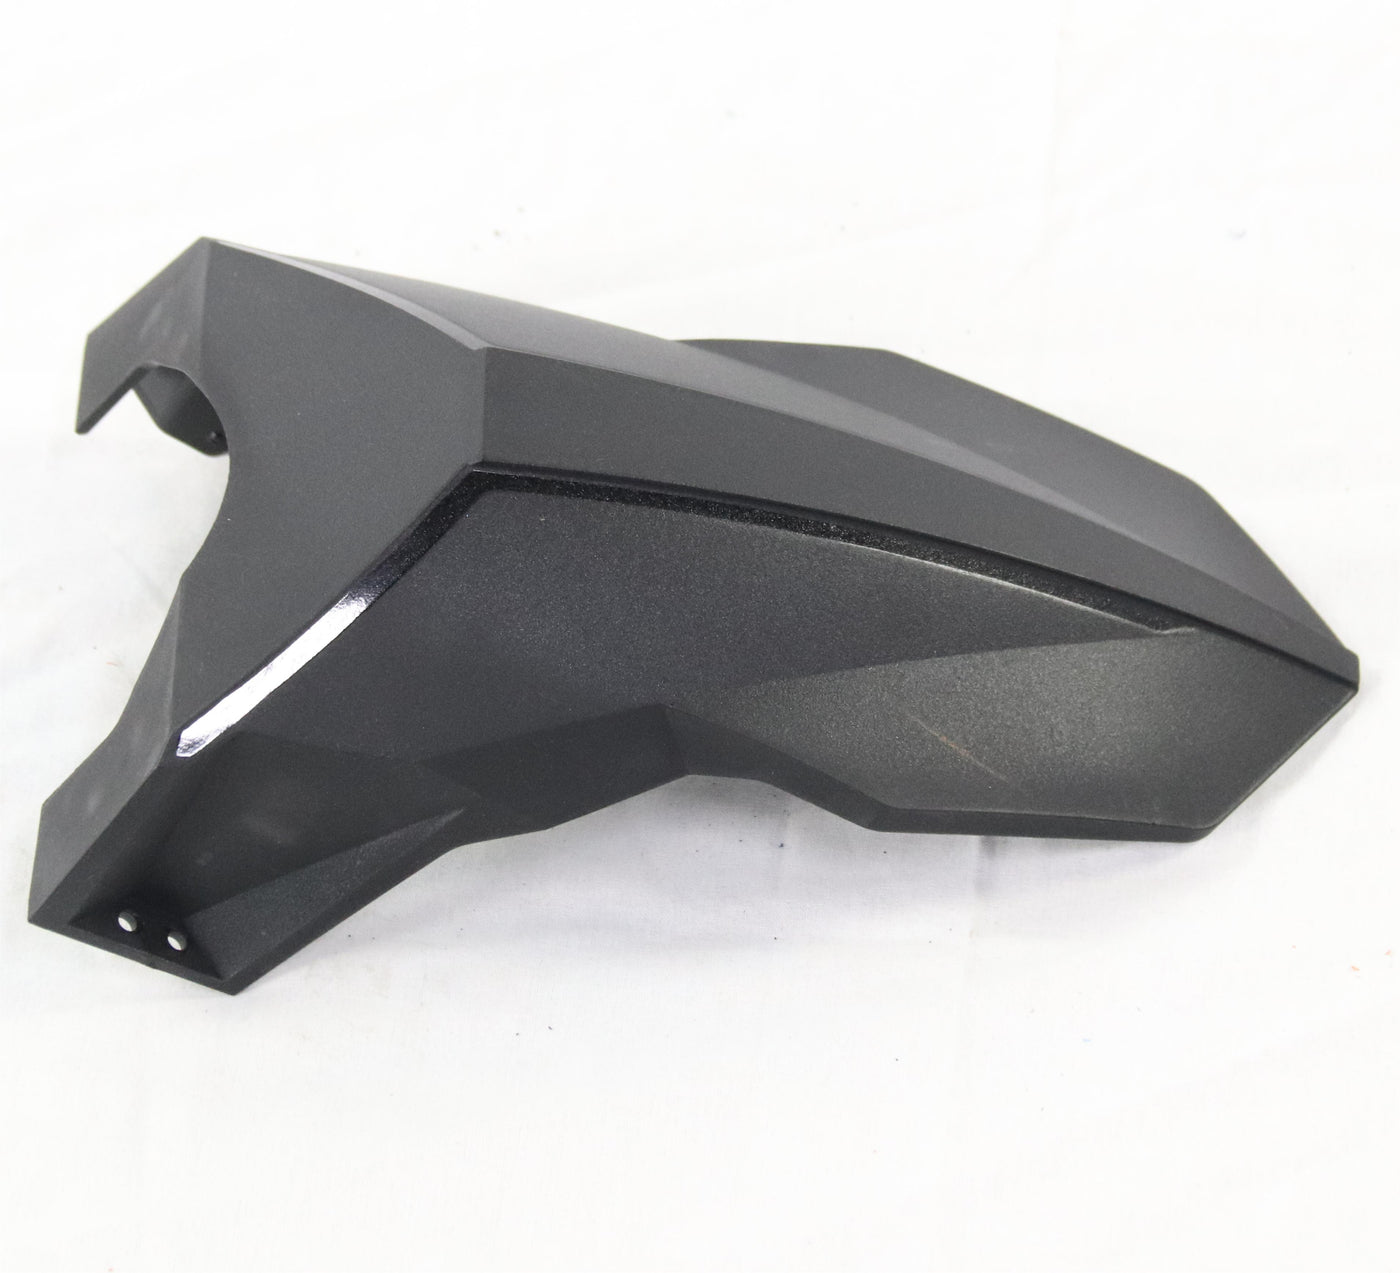 Front Fender and Rear Fender for KUGOO Electric Scooter